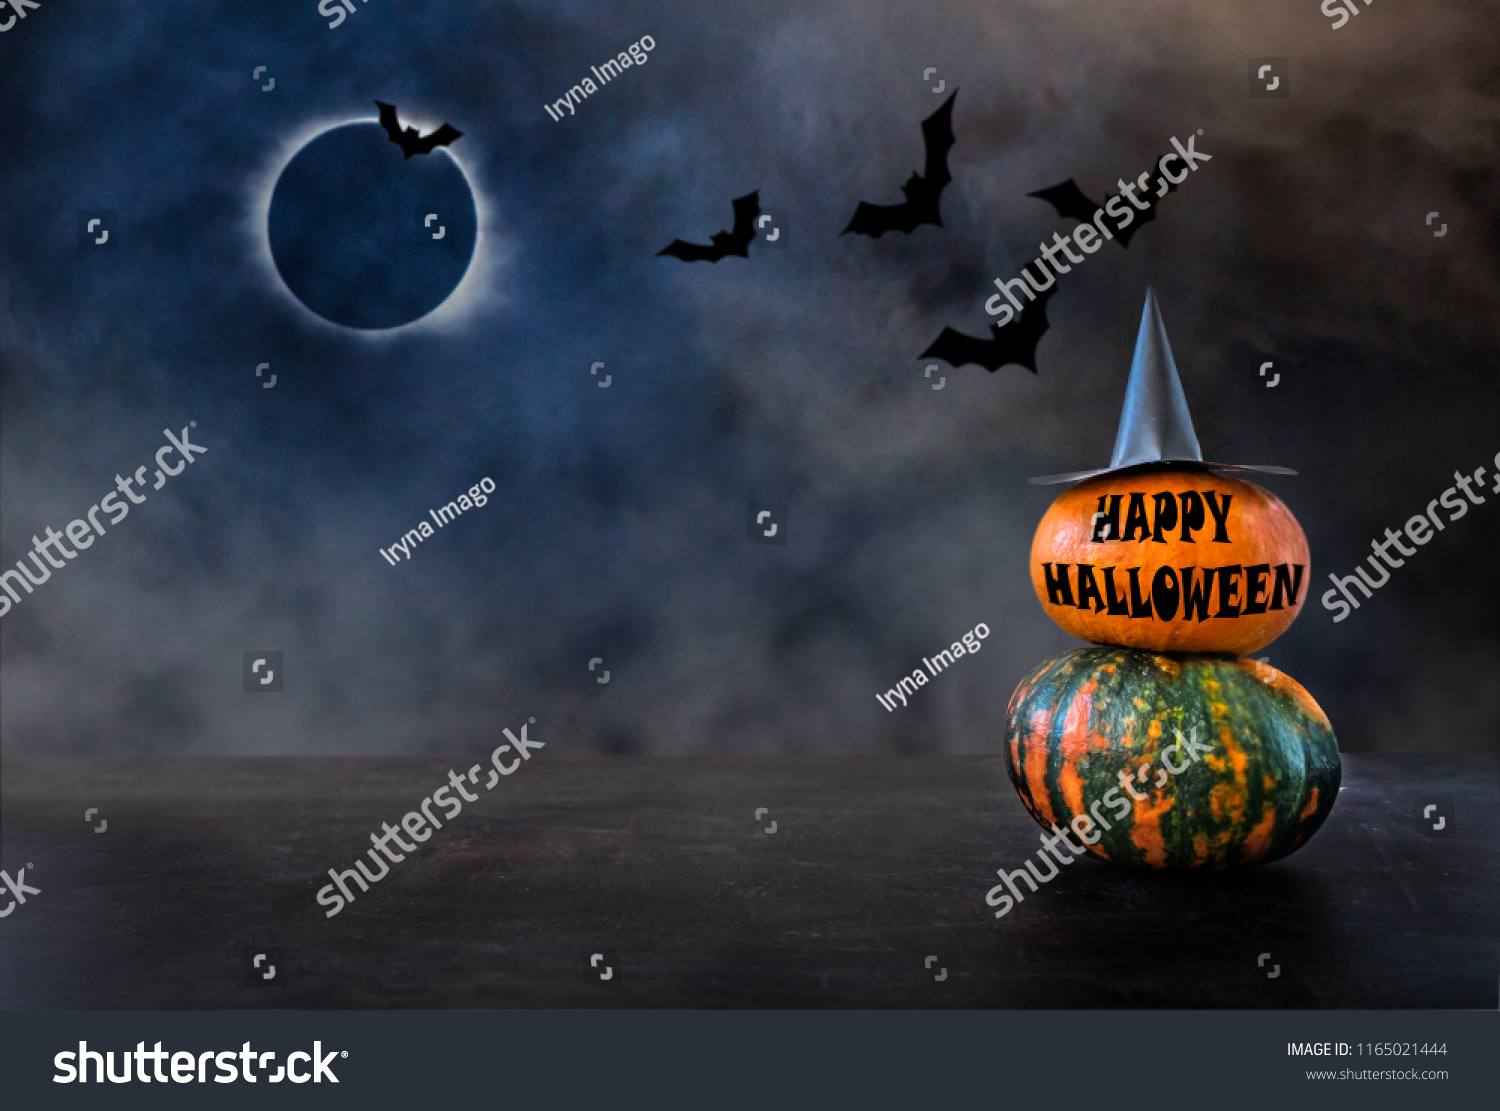 Two pumpkins with witch hat and text HAPPY HALLOWEEN against the background of the night sky, bats and the moon eclipse. Pumpkins At Moonlight In The Spooky Night - Halloween Scene #1165021444